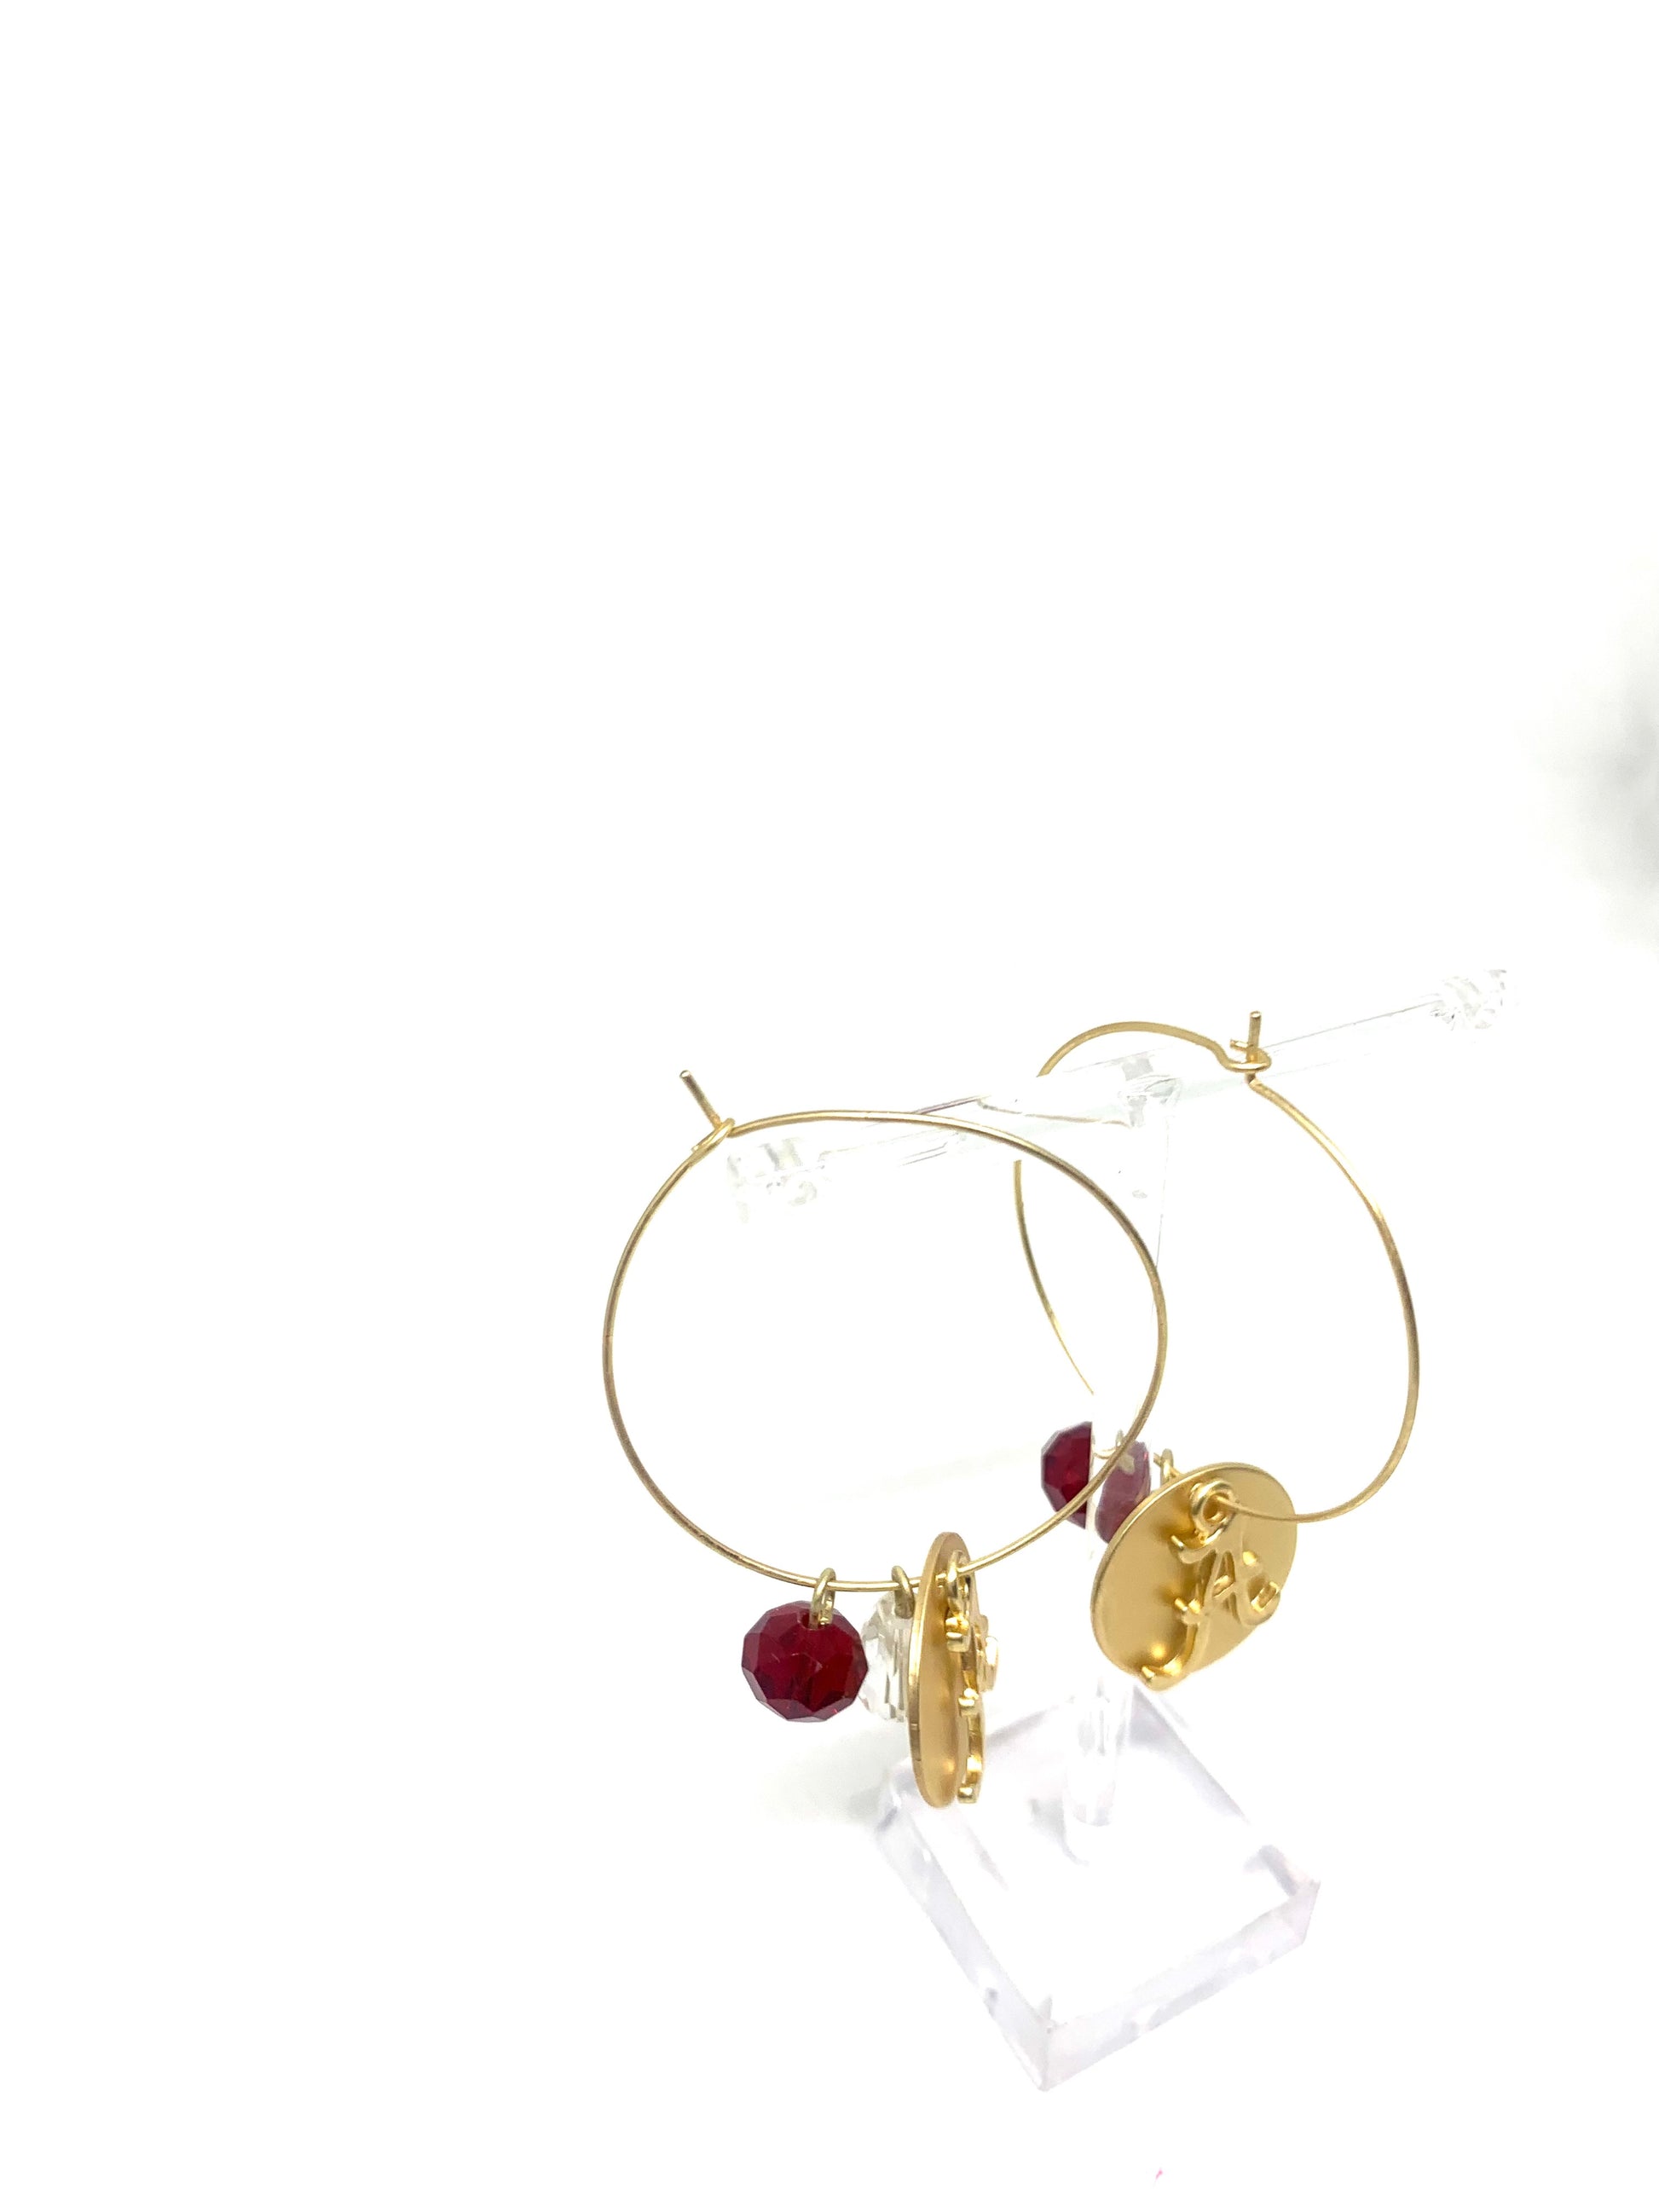 Roll with the Tide in these University of Alabama gold hoops. Show your support for Alabama while being simple and stylish. These gold kidney wire closure hoops feature the University of Alabama logo on a circle charm and maroon bead, Perfect for all your game day looks. 